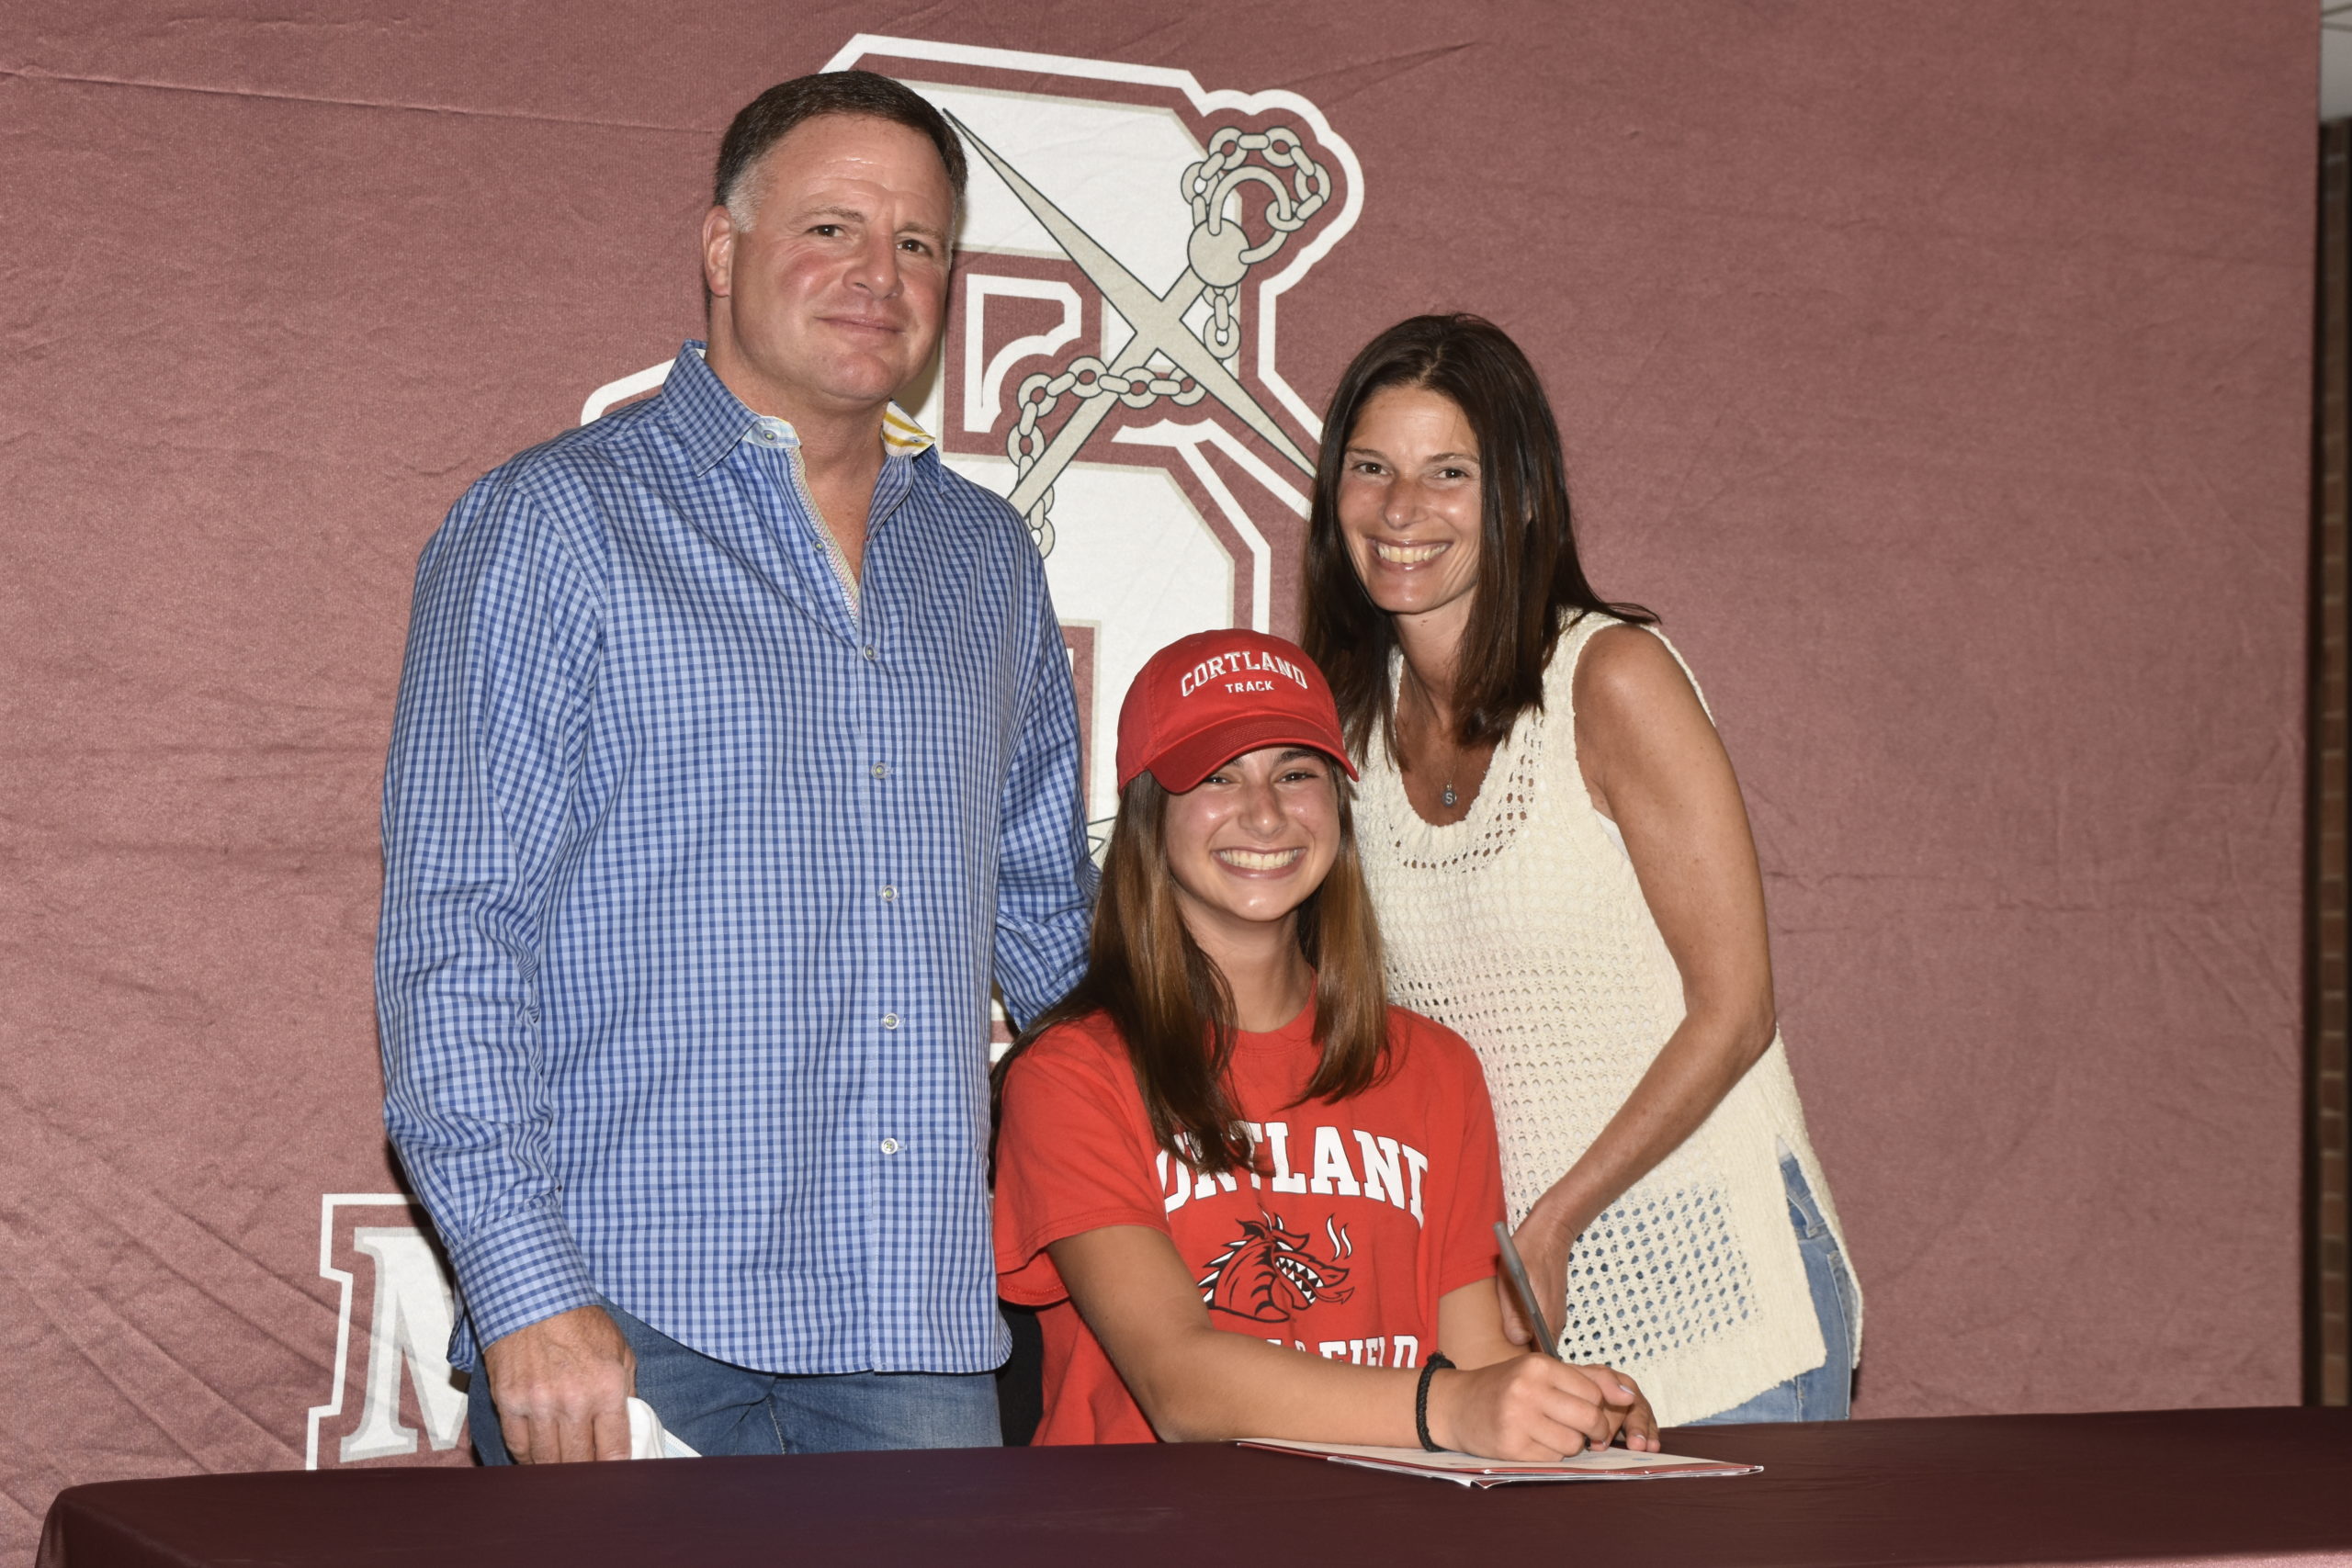 Amanda Mannino with her parents Michael and Stephanie.